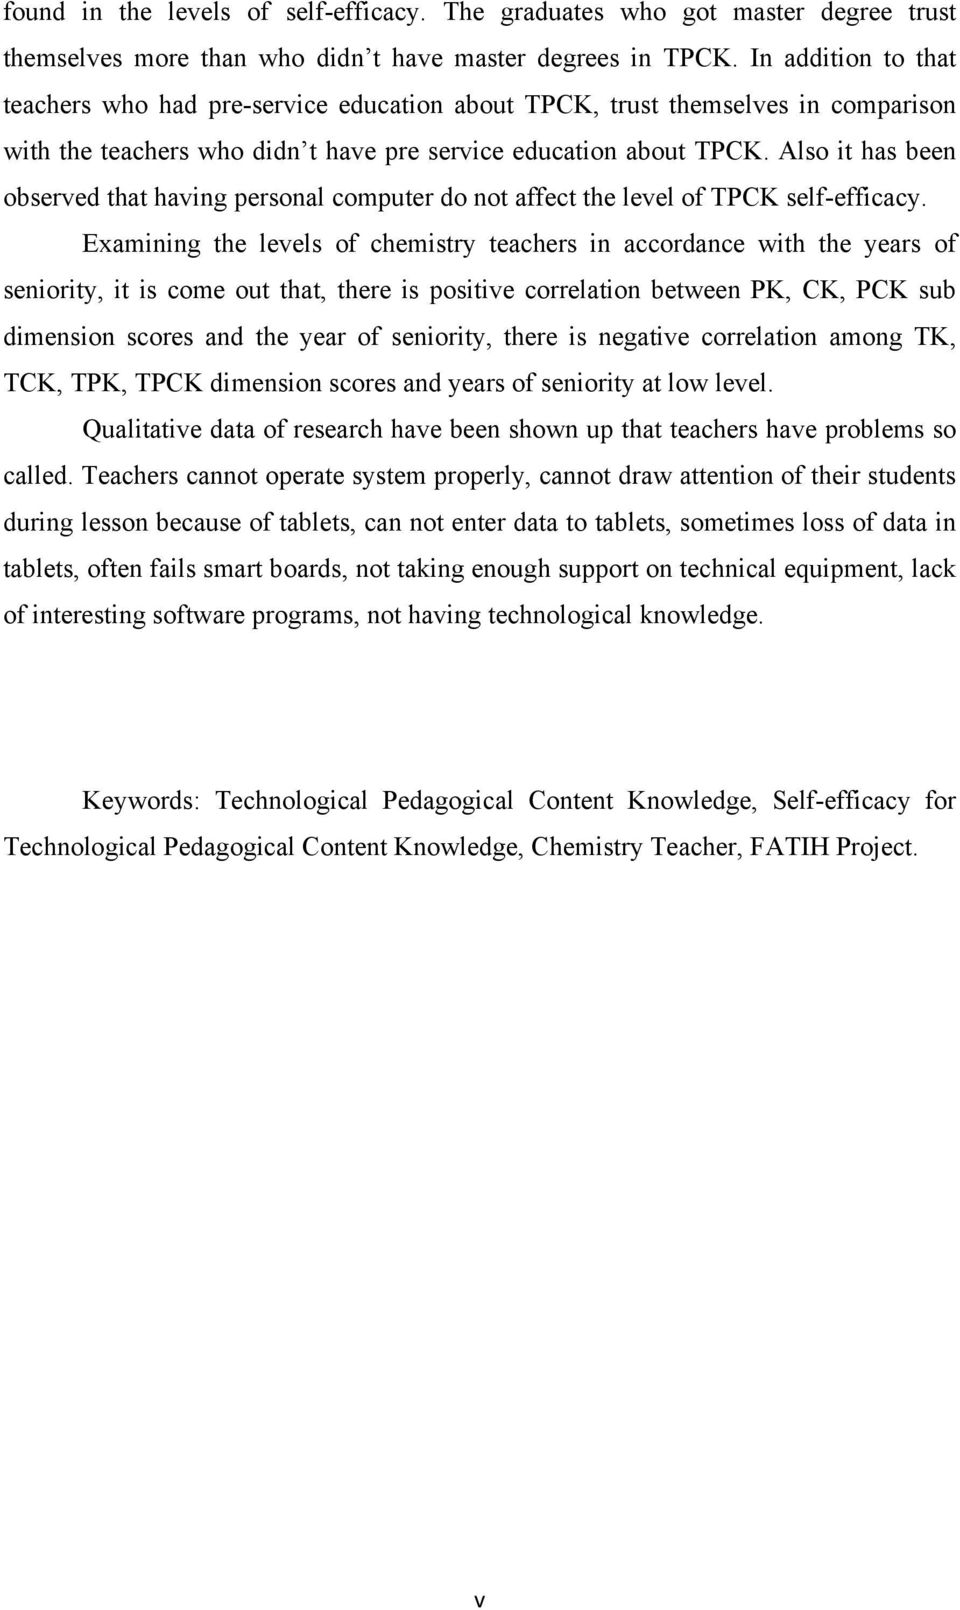 Also it has been observed that having personal computer do not affect the level of TPCK self-efficacy.